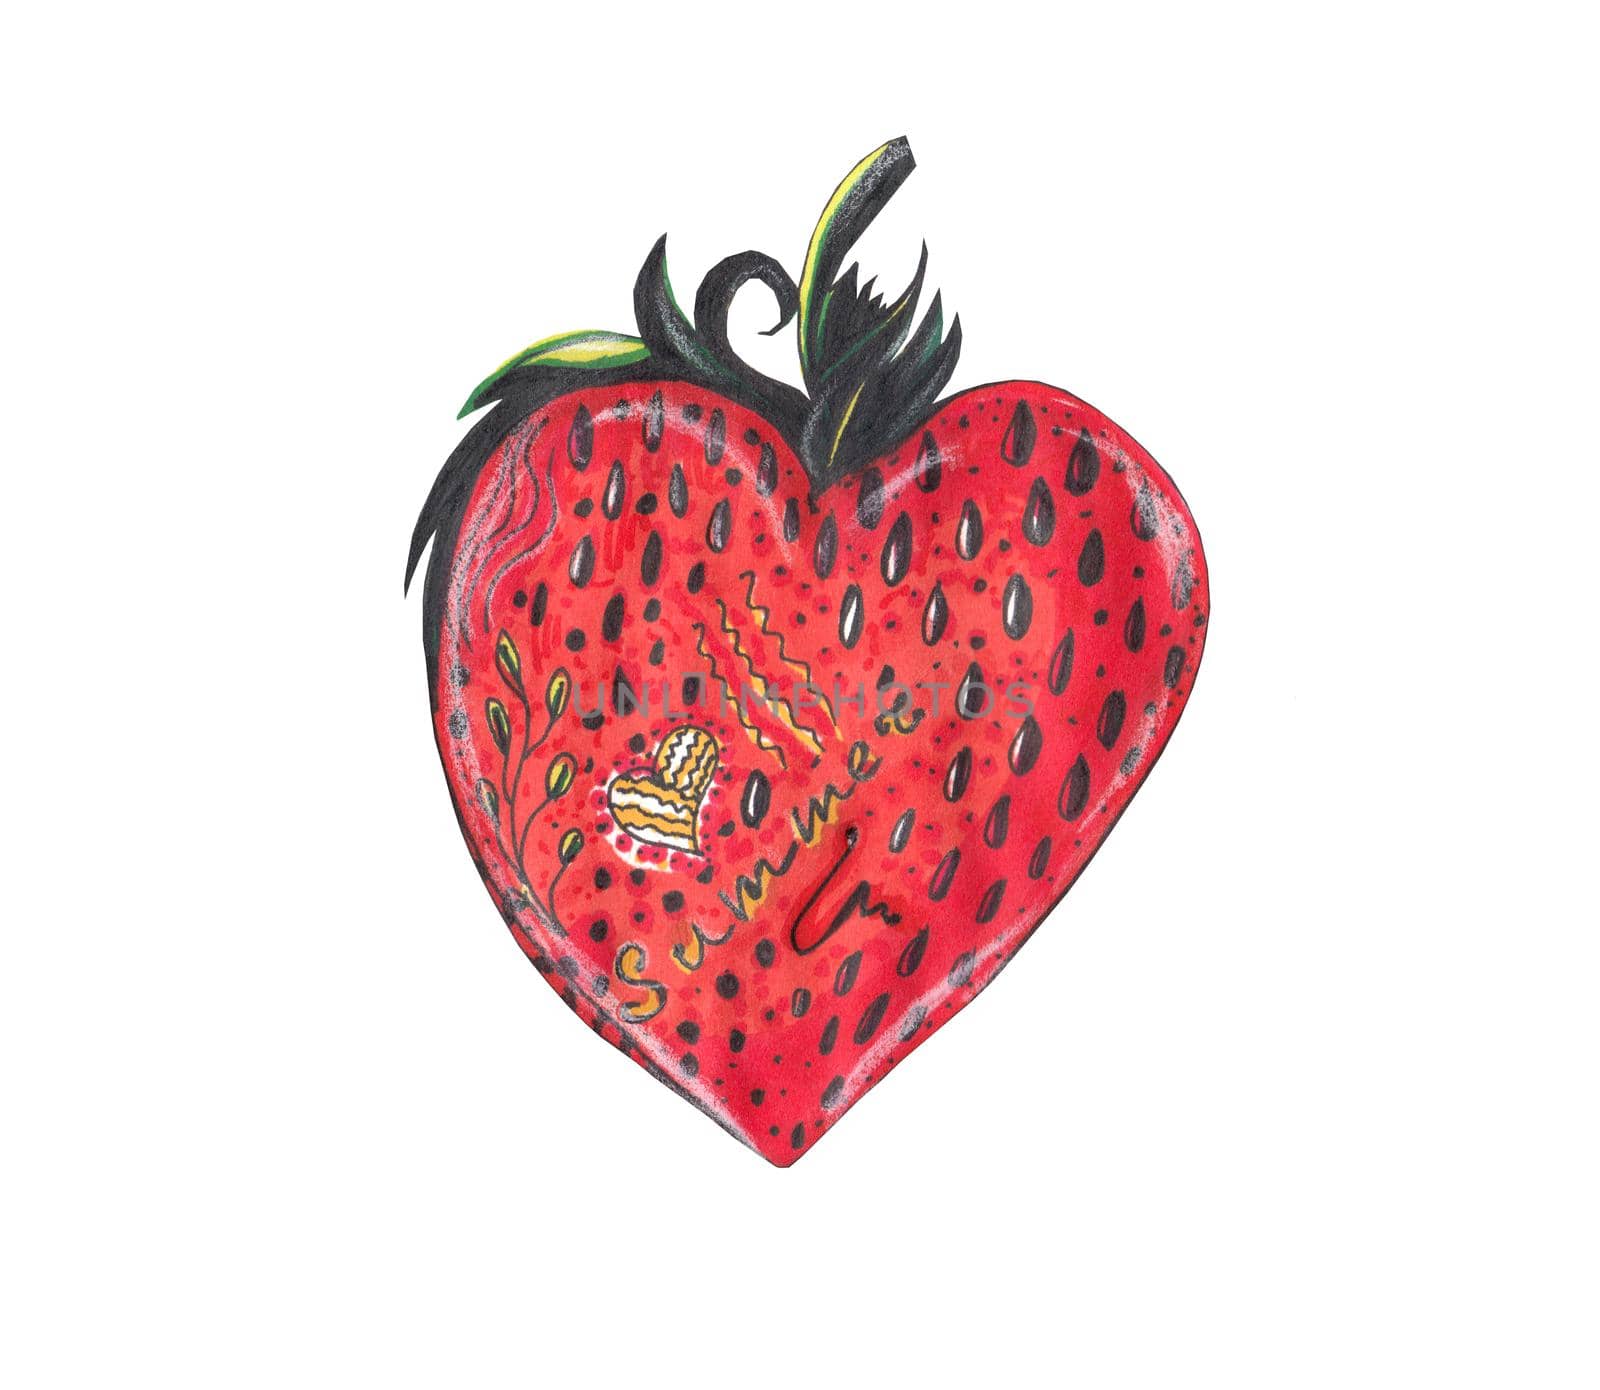 Sweet red strawberry in a heart shape with green leaves on white background. Doodle illustration. Marker drawing.